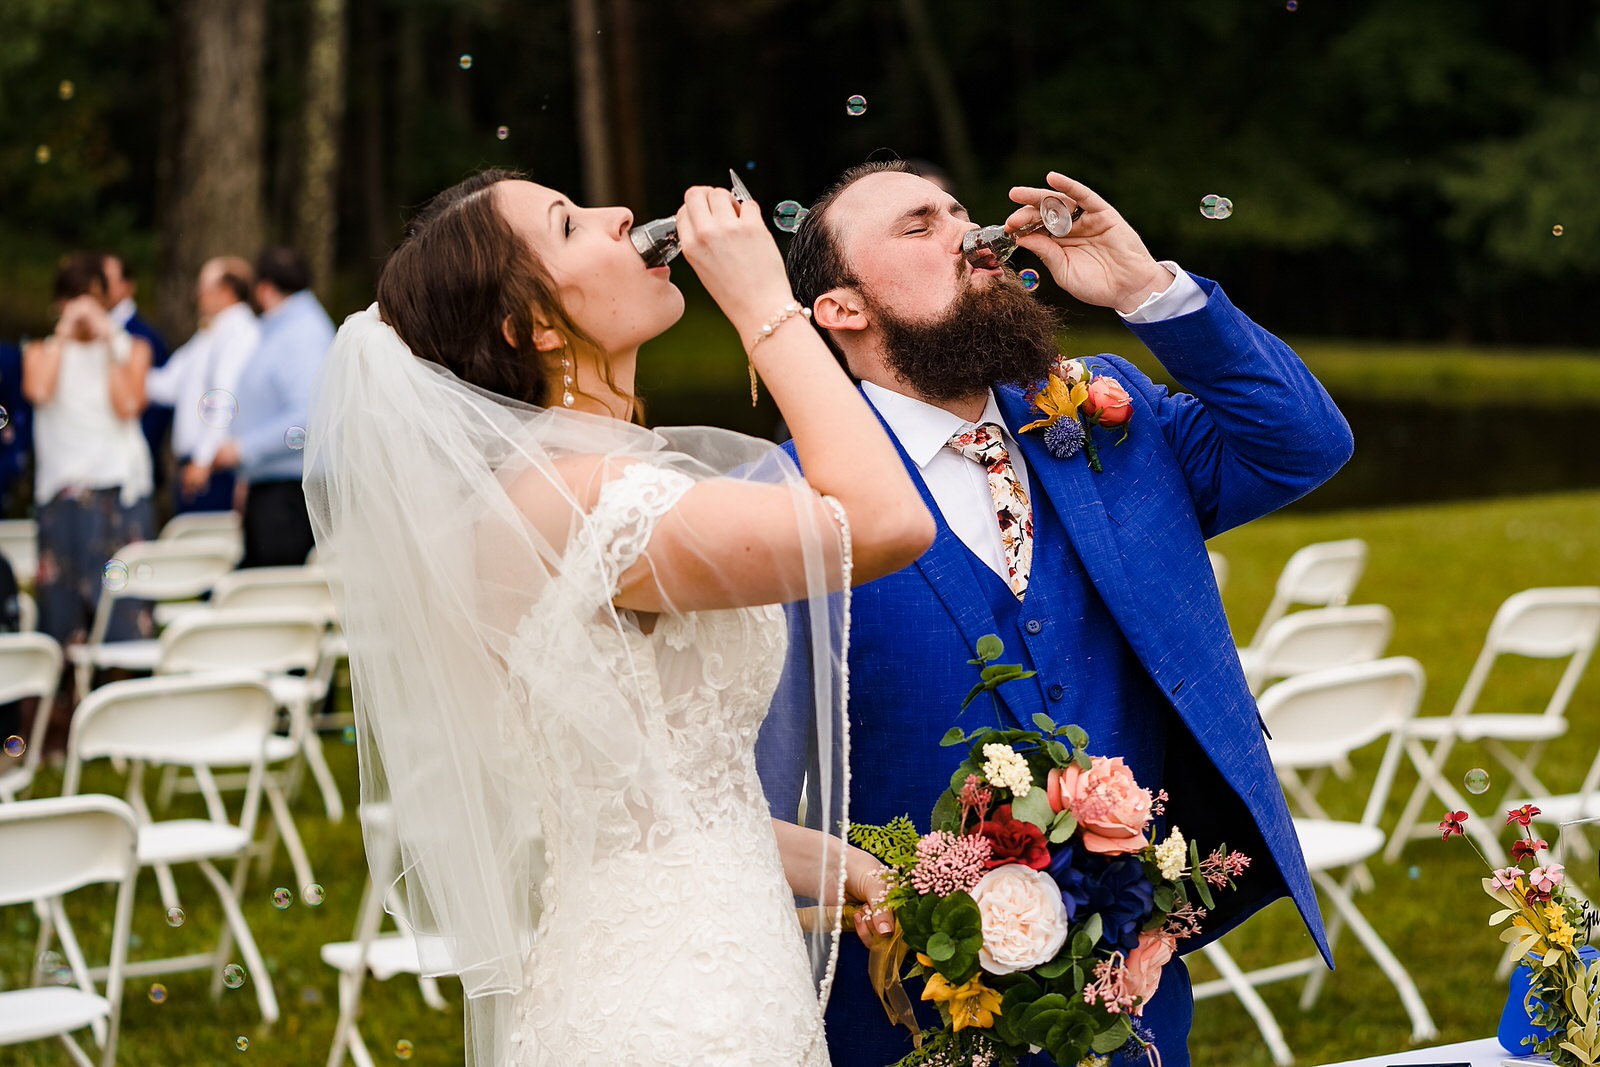 Bride and groom take a shot together at the end of their wedding ceremony